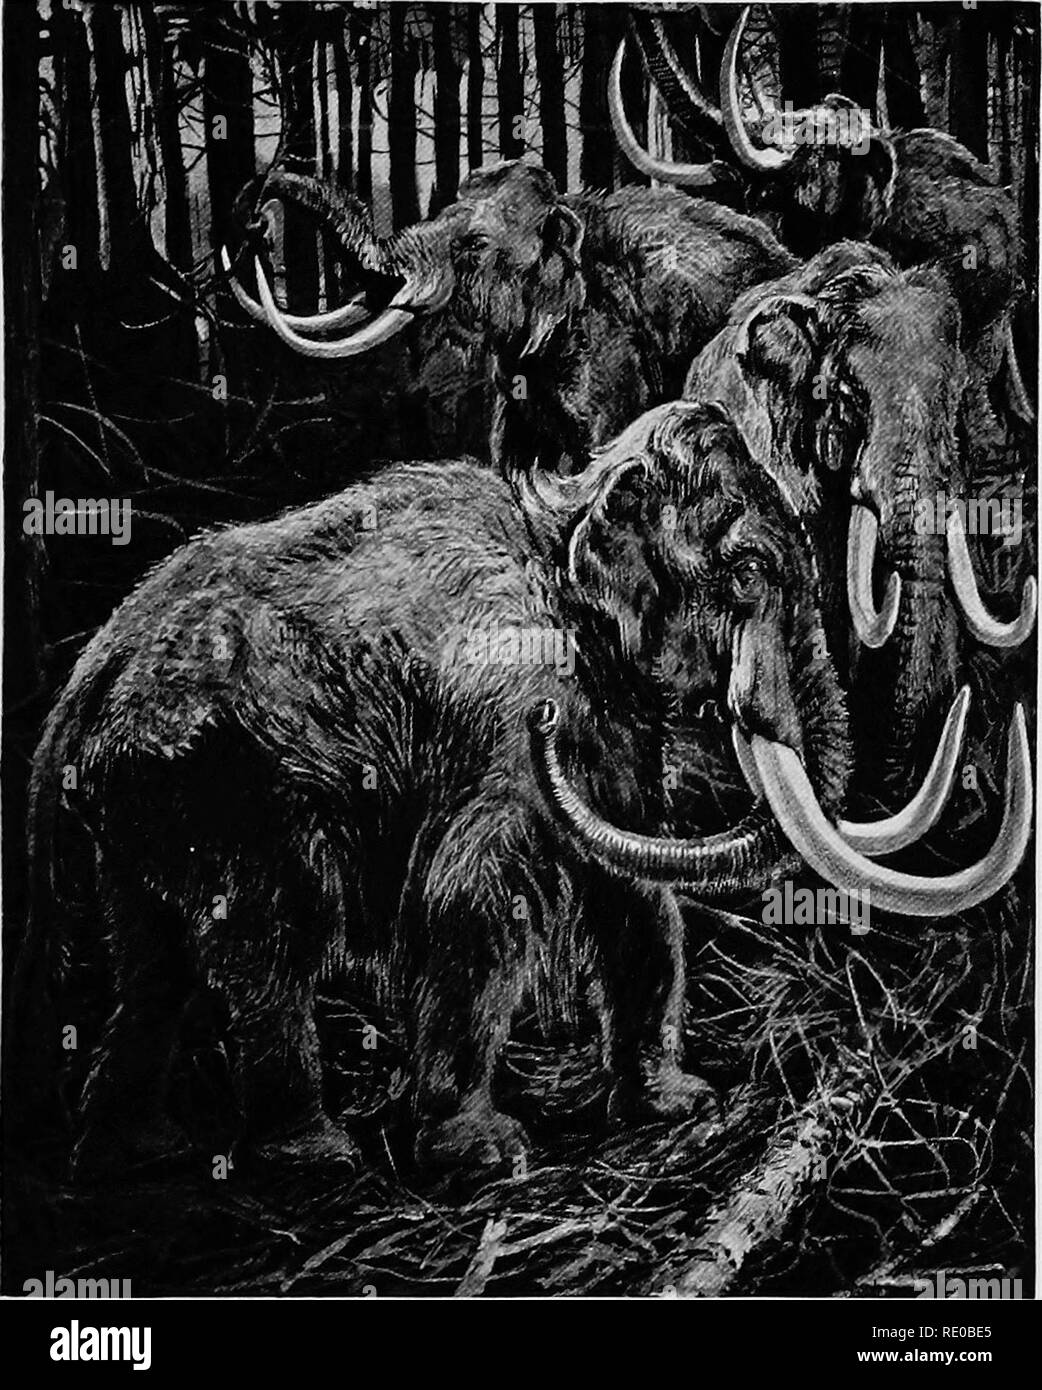 The infancy of animals. Animal behavior; Natural history. After a drawing  by Sir Harry Johnston from "Marvels of the Universe." MAMMOTHS.  The Mammoths, and probably other extinct species of Elephants, were